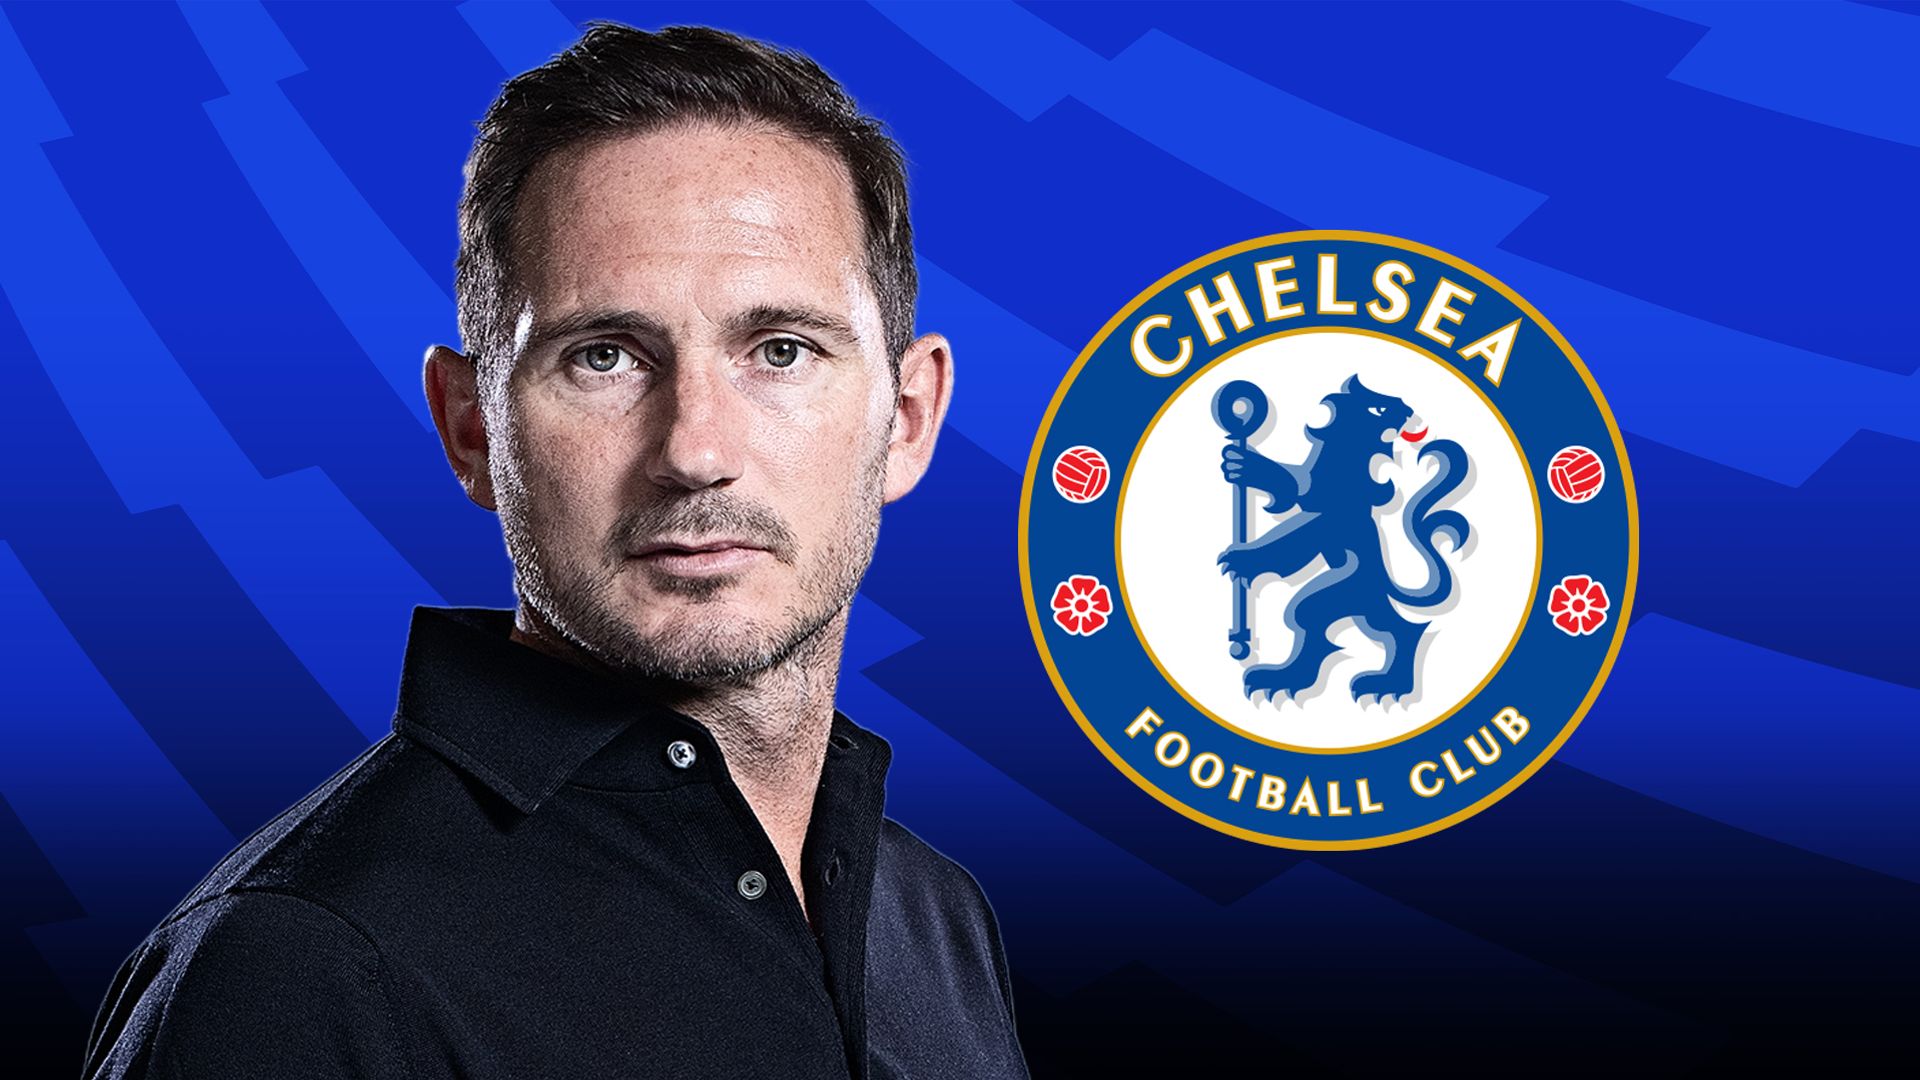 Chelsea set to appoint Lampard as caretaker manager